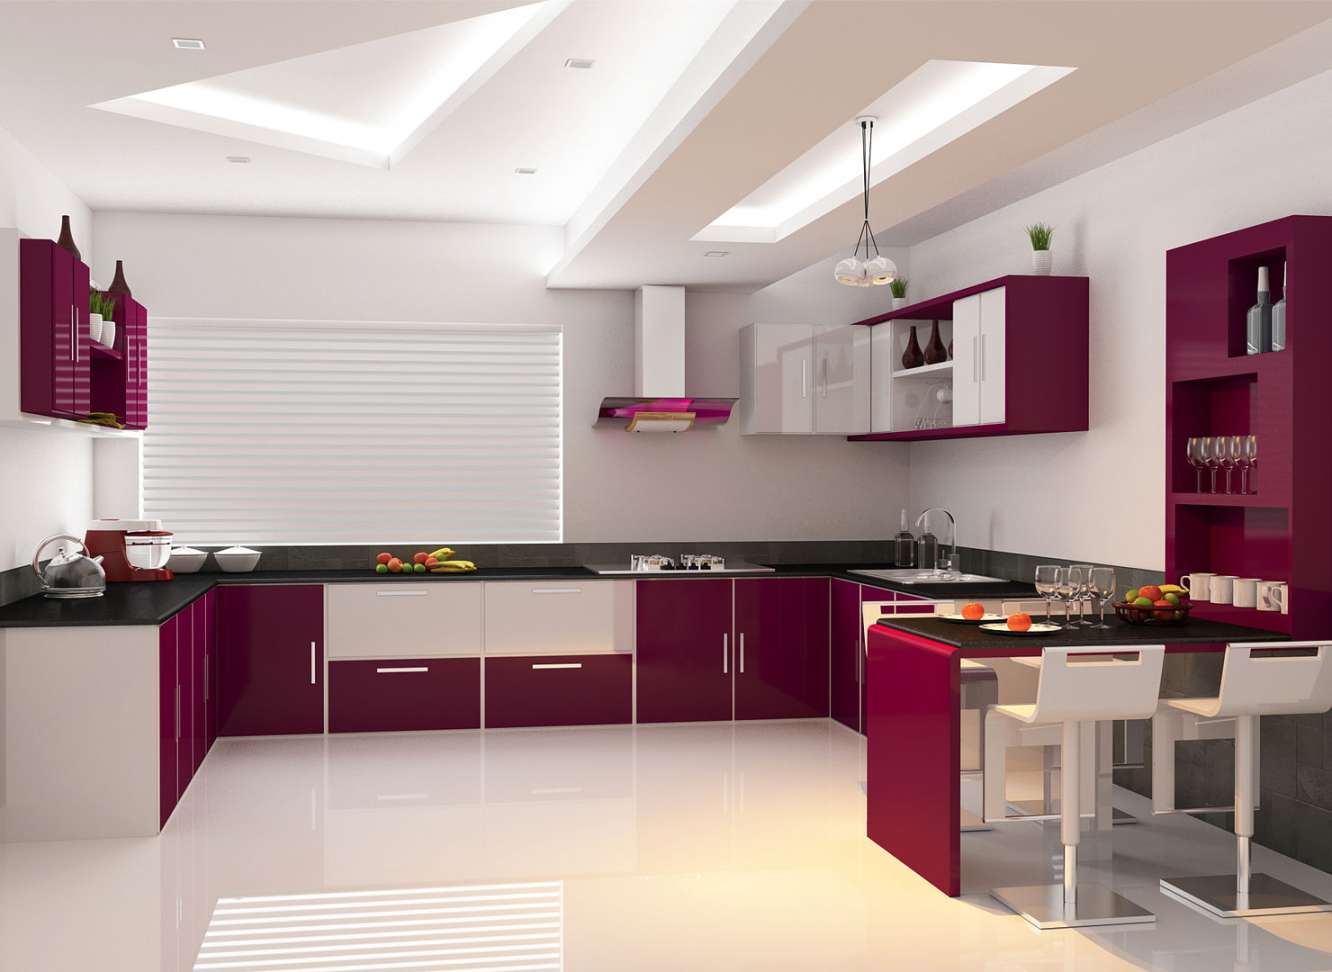 pictures of kitchen cabinets for Indian homes  homify